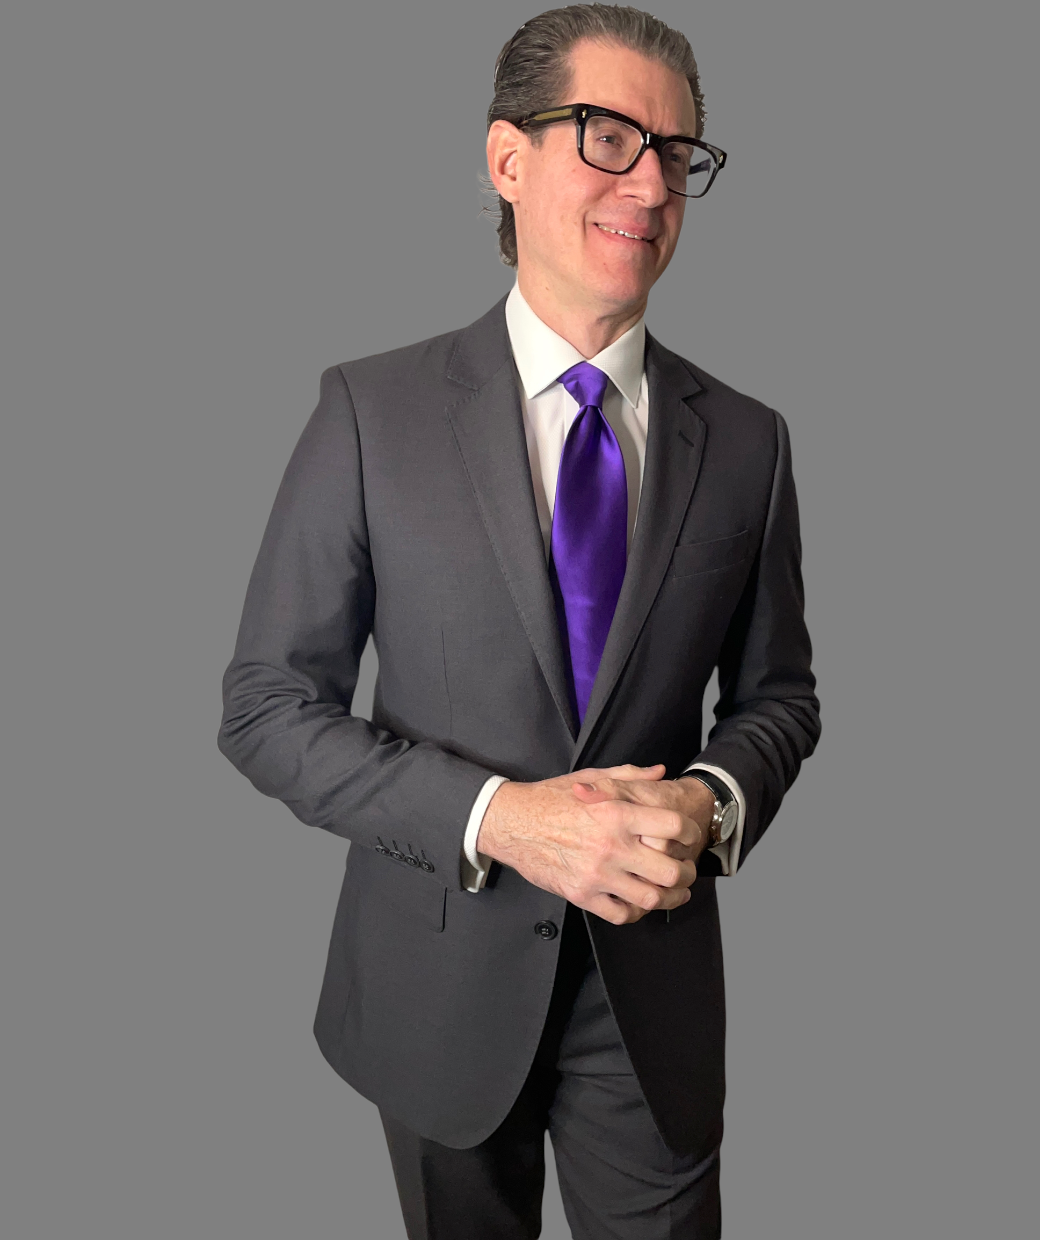 Suitcafe Launches New Bespoke Suit In CashLana2.0™ Fabric Online